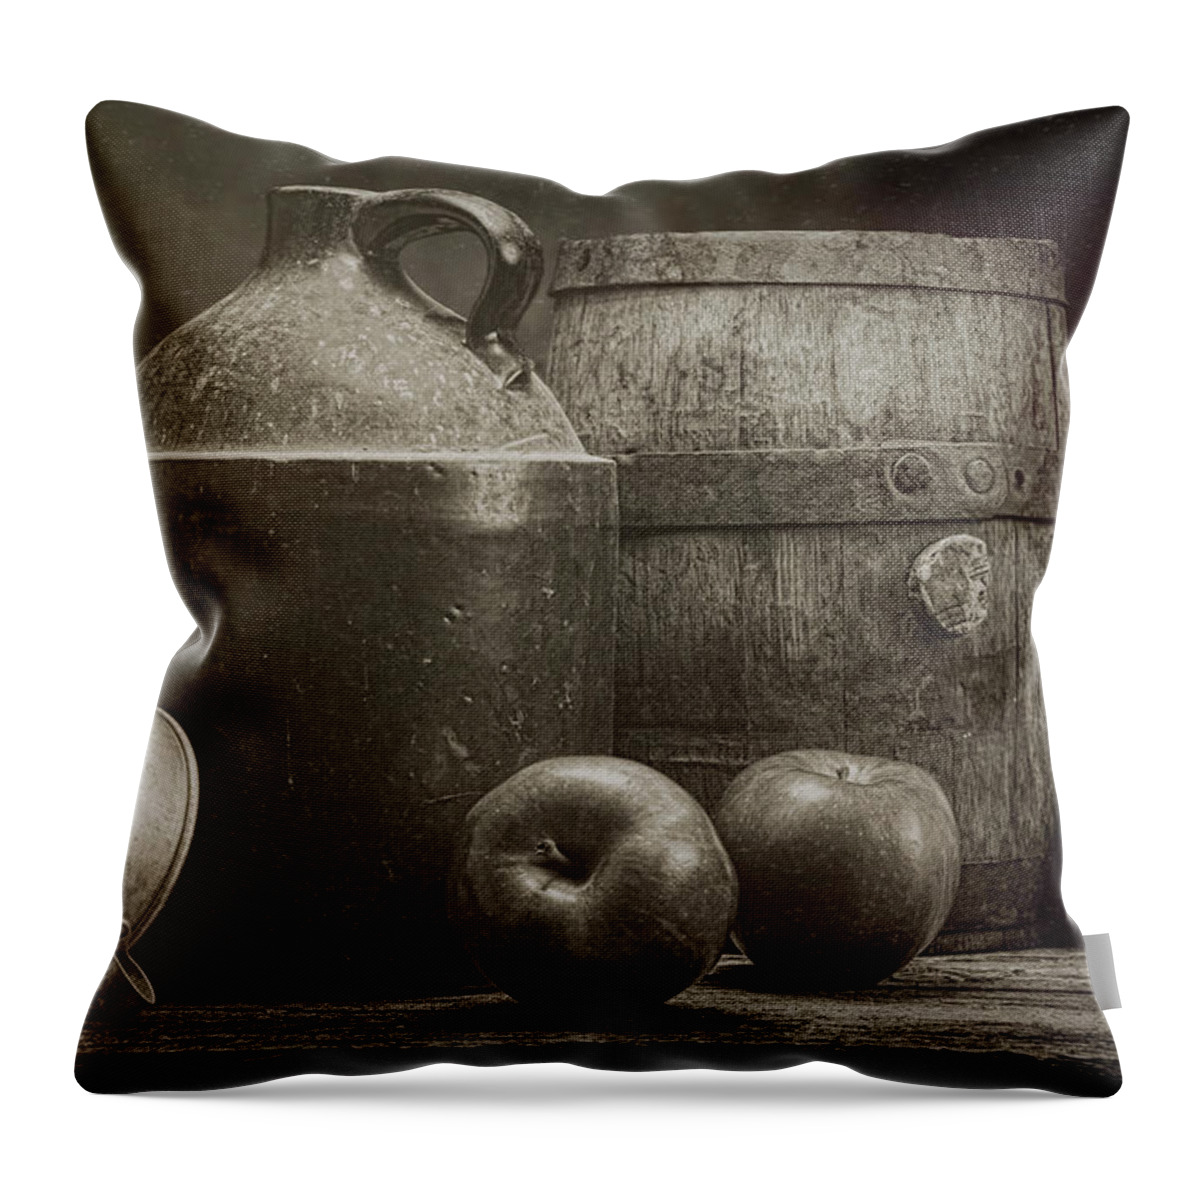 Aged Throw Pillow featuring the photograph Cider Apples Still Life by Tom Mc Nemar